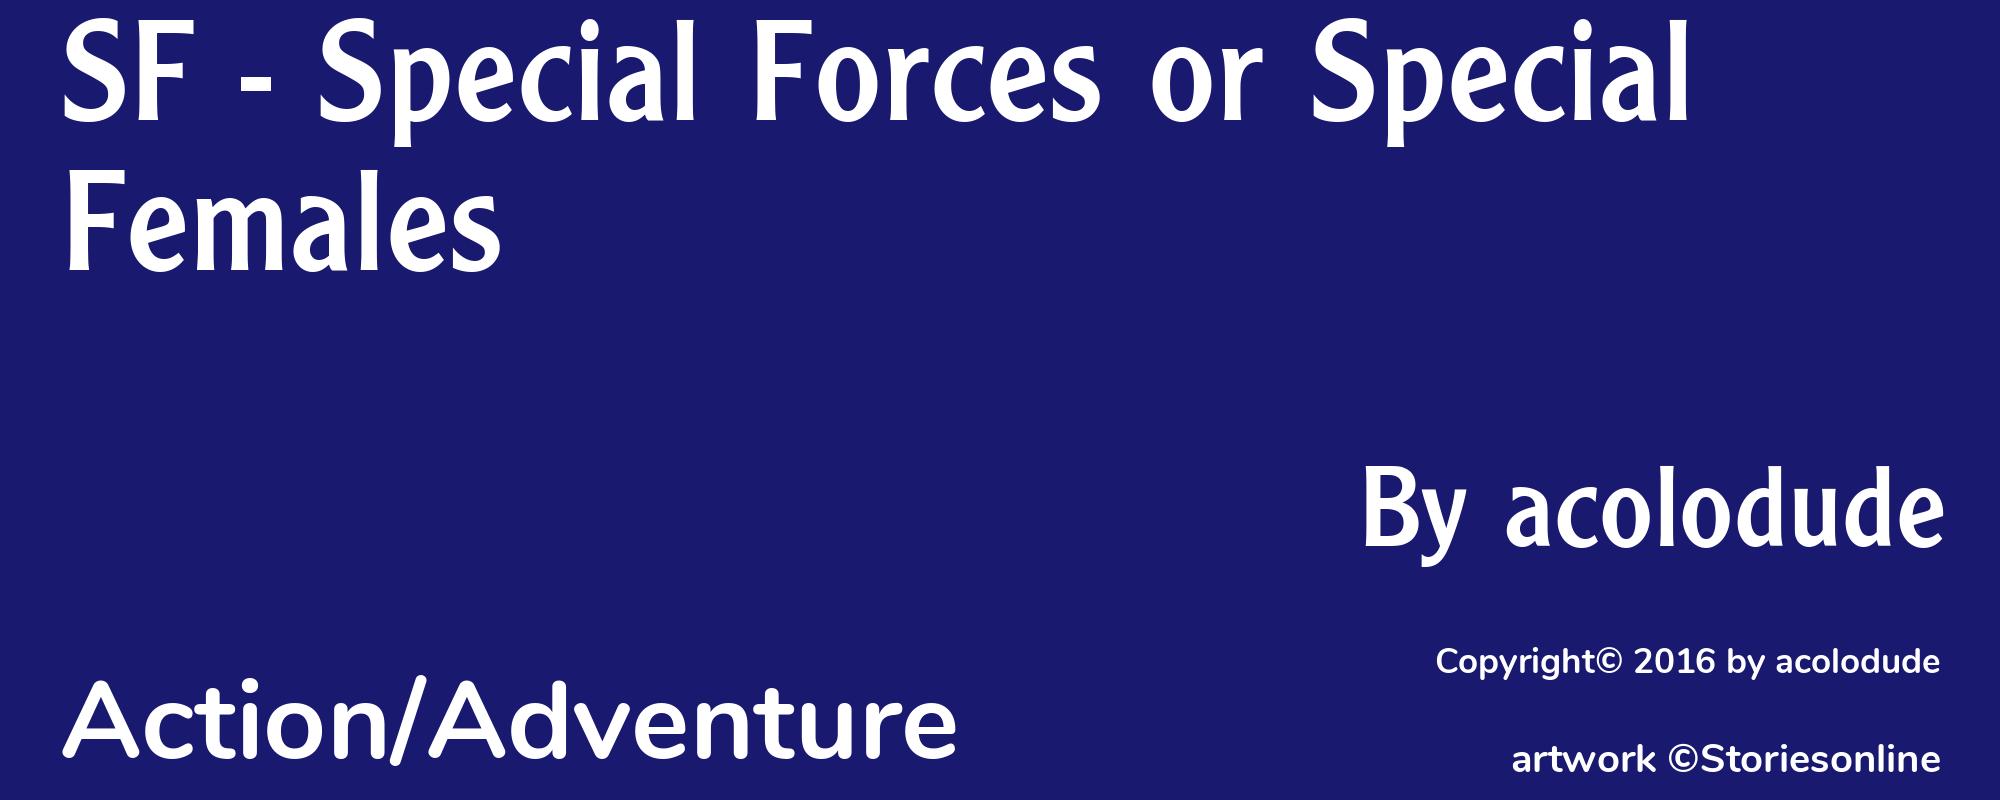 SF - Special Forces or Special Females - Cover